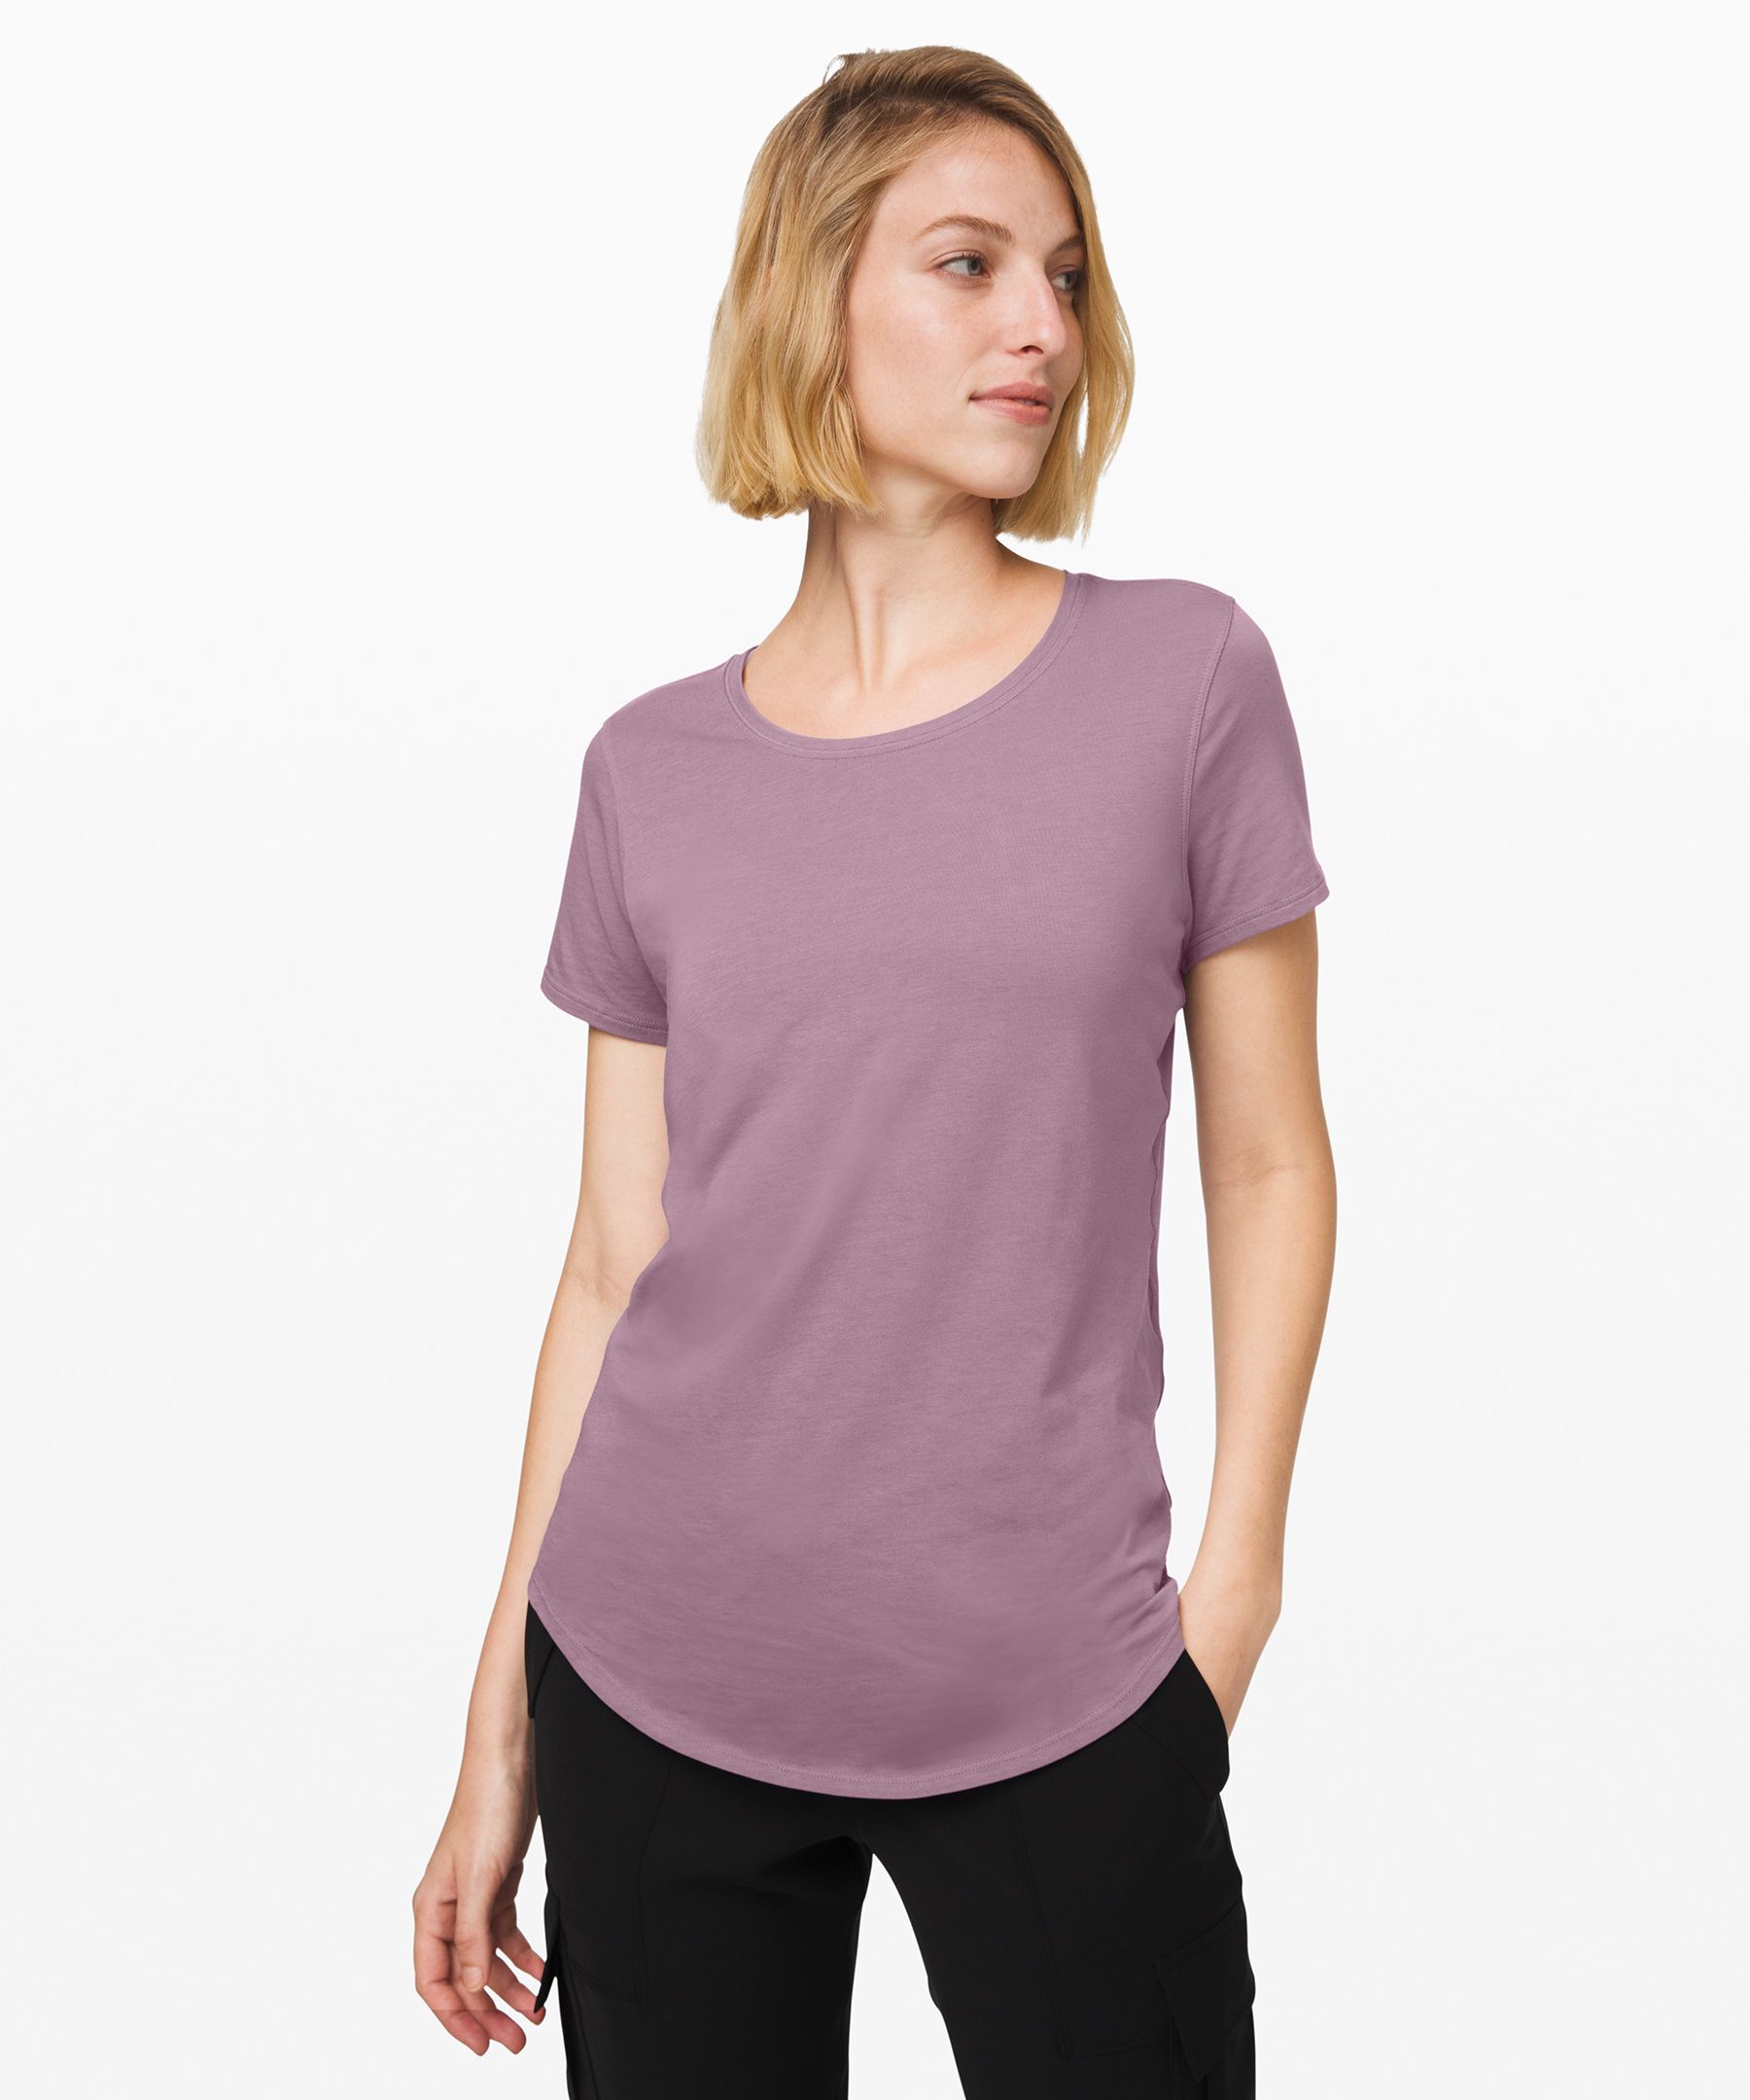 Lululemon Love Crew Iii In Frosted Mulberry